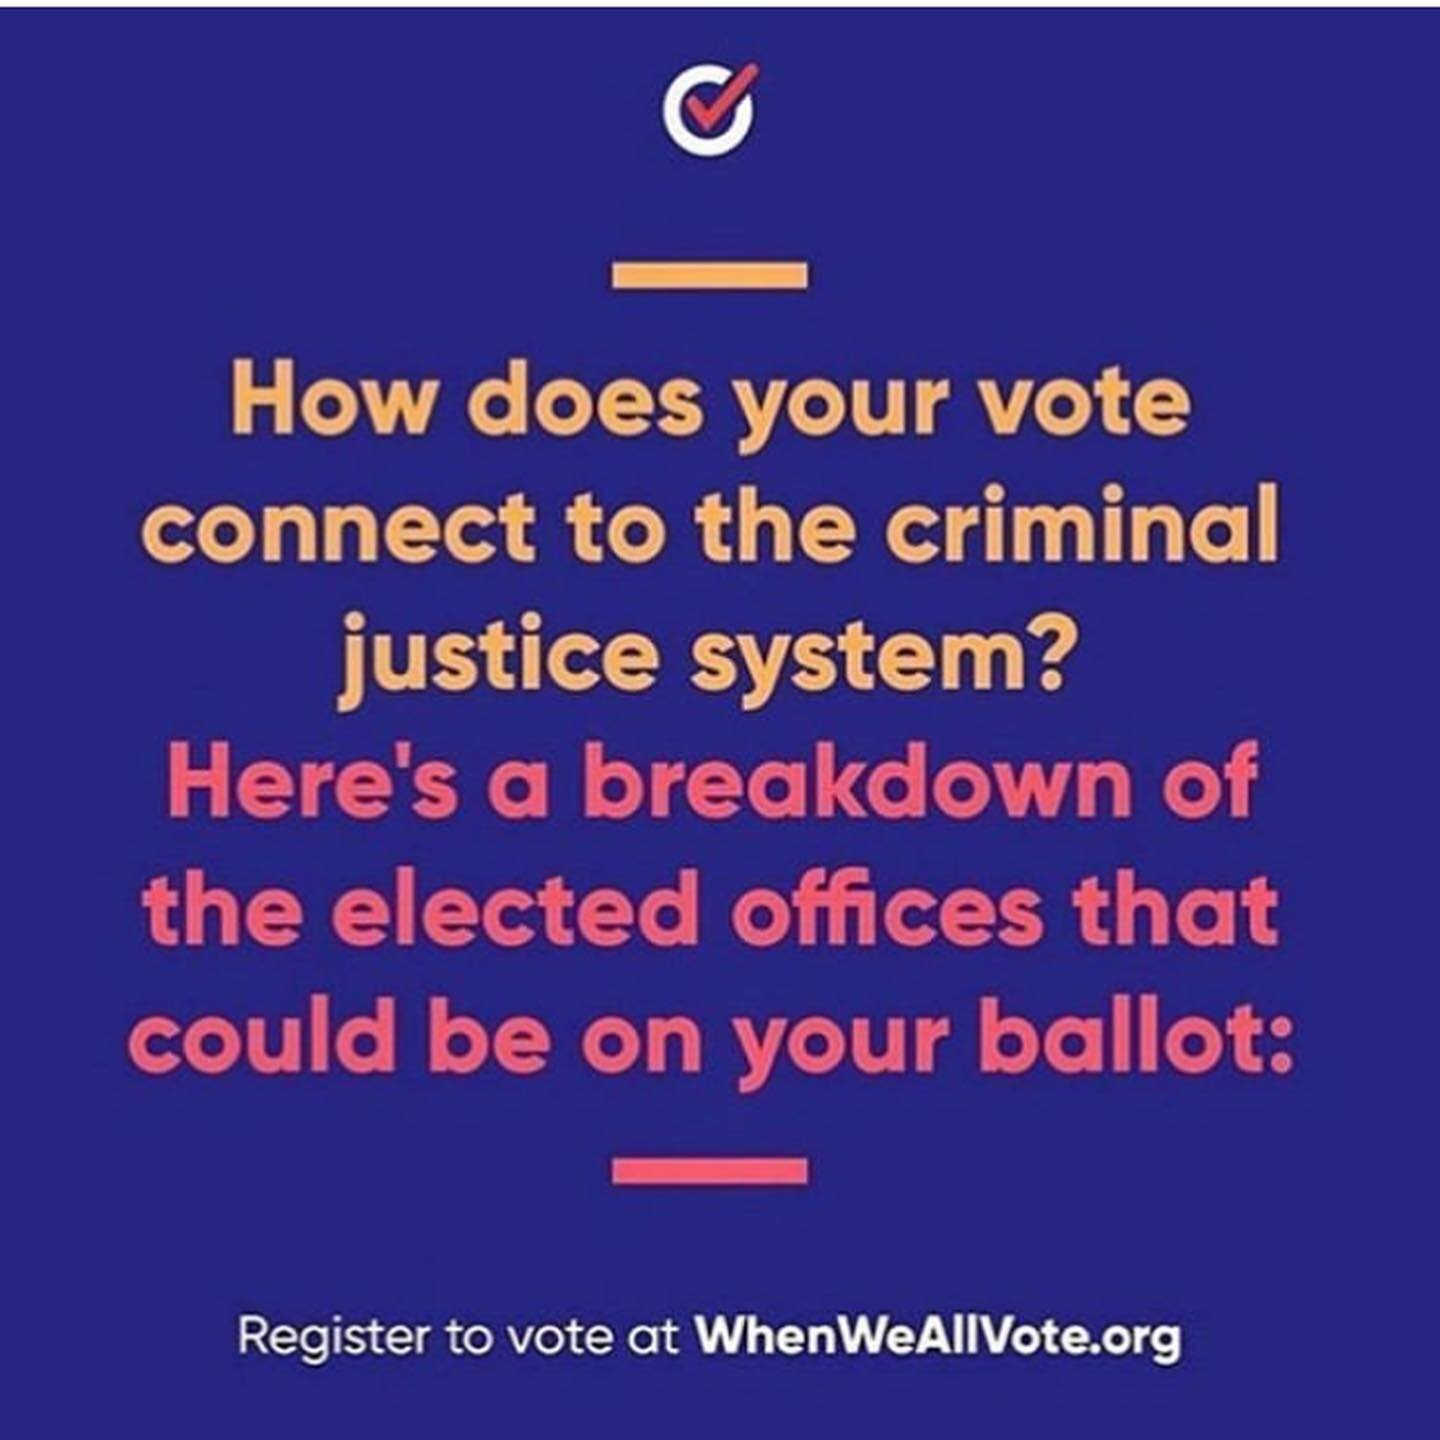 Muy important&eacute; ! November 3rd 2020 #yourvotecounts #vote plethora of ways to speak on what matters to you.